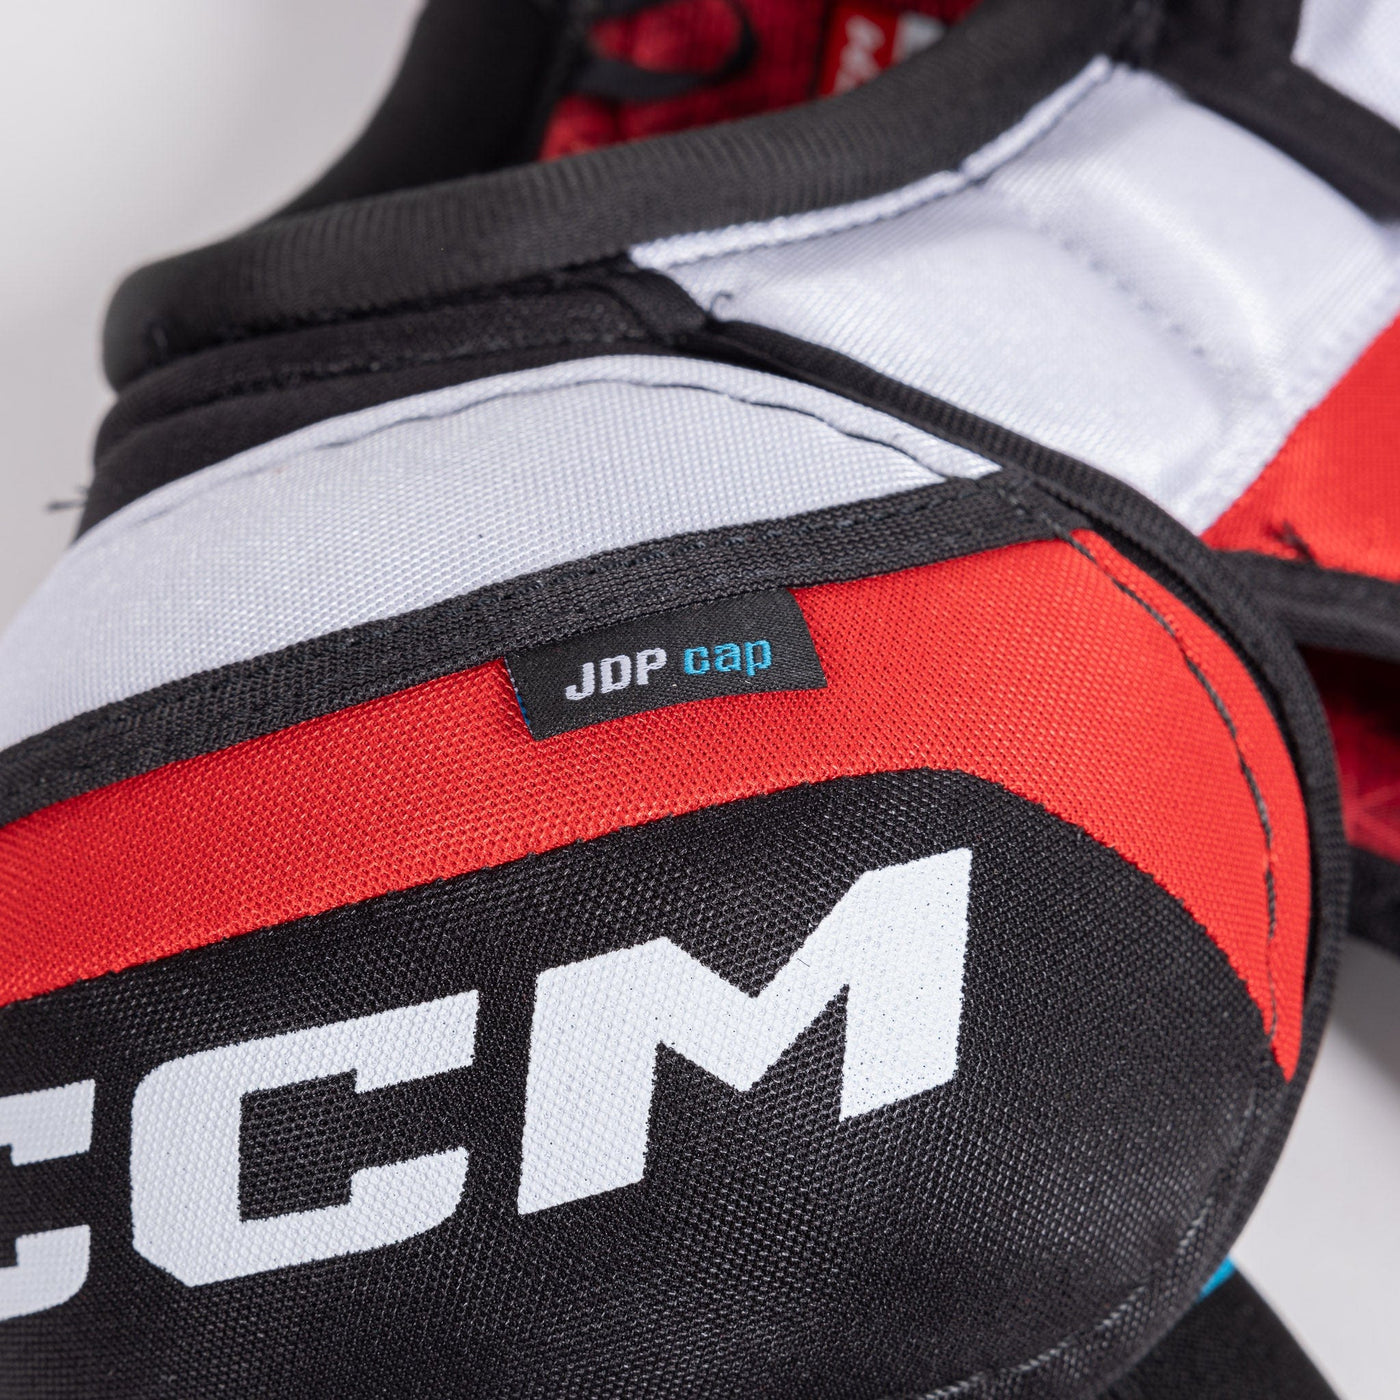 CCM Jetspeed Vibe Junior Hockey Shoulder Pads - The Hockey Shop Source For Sports